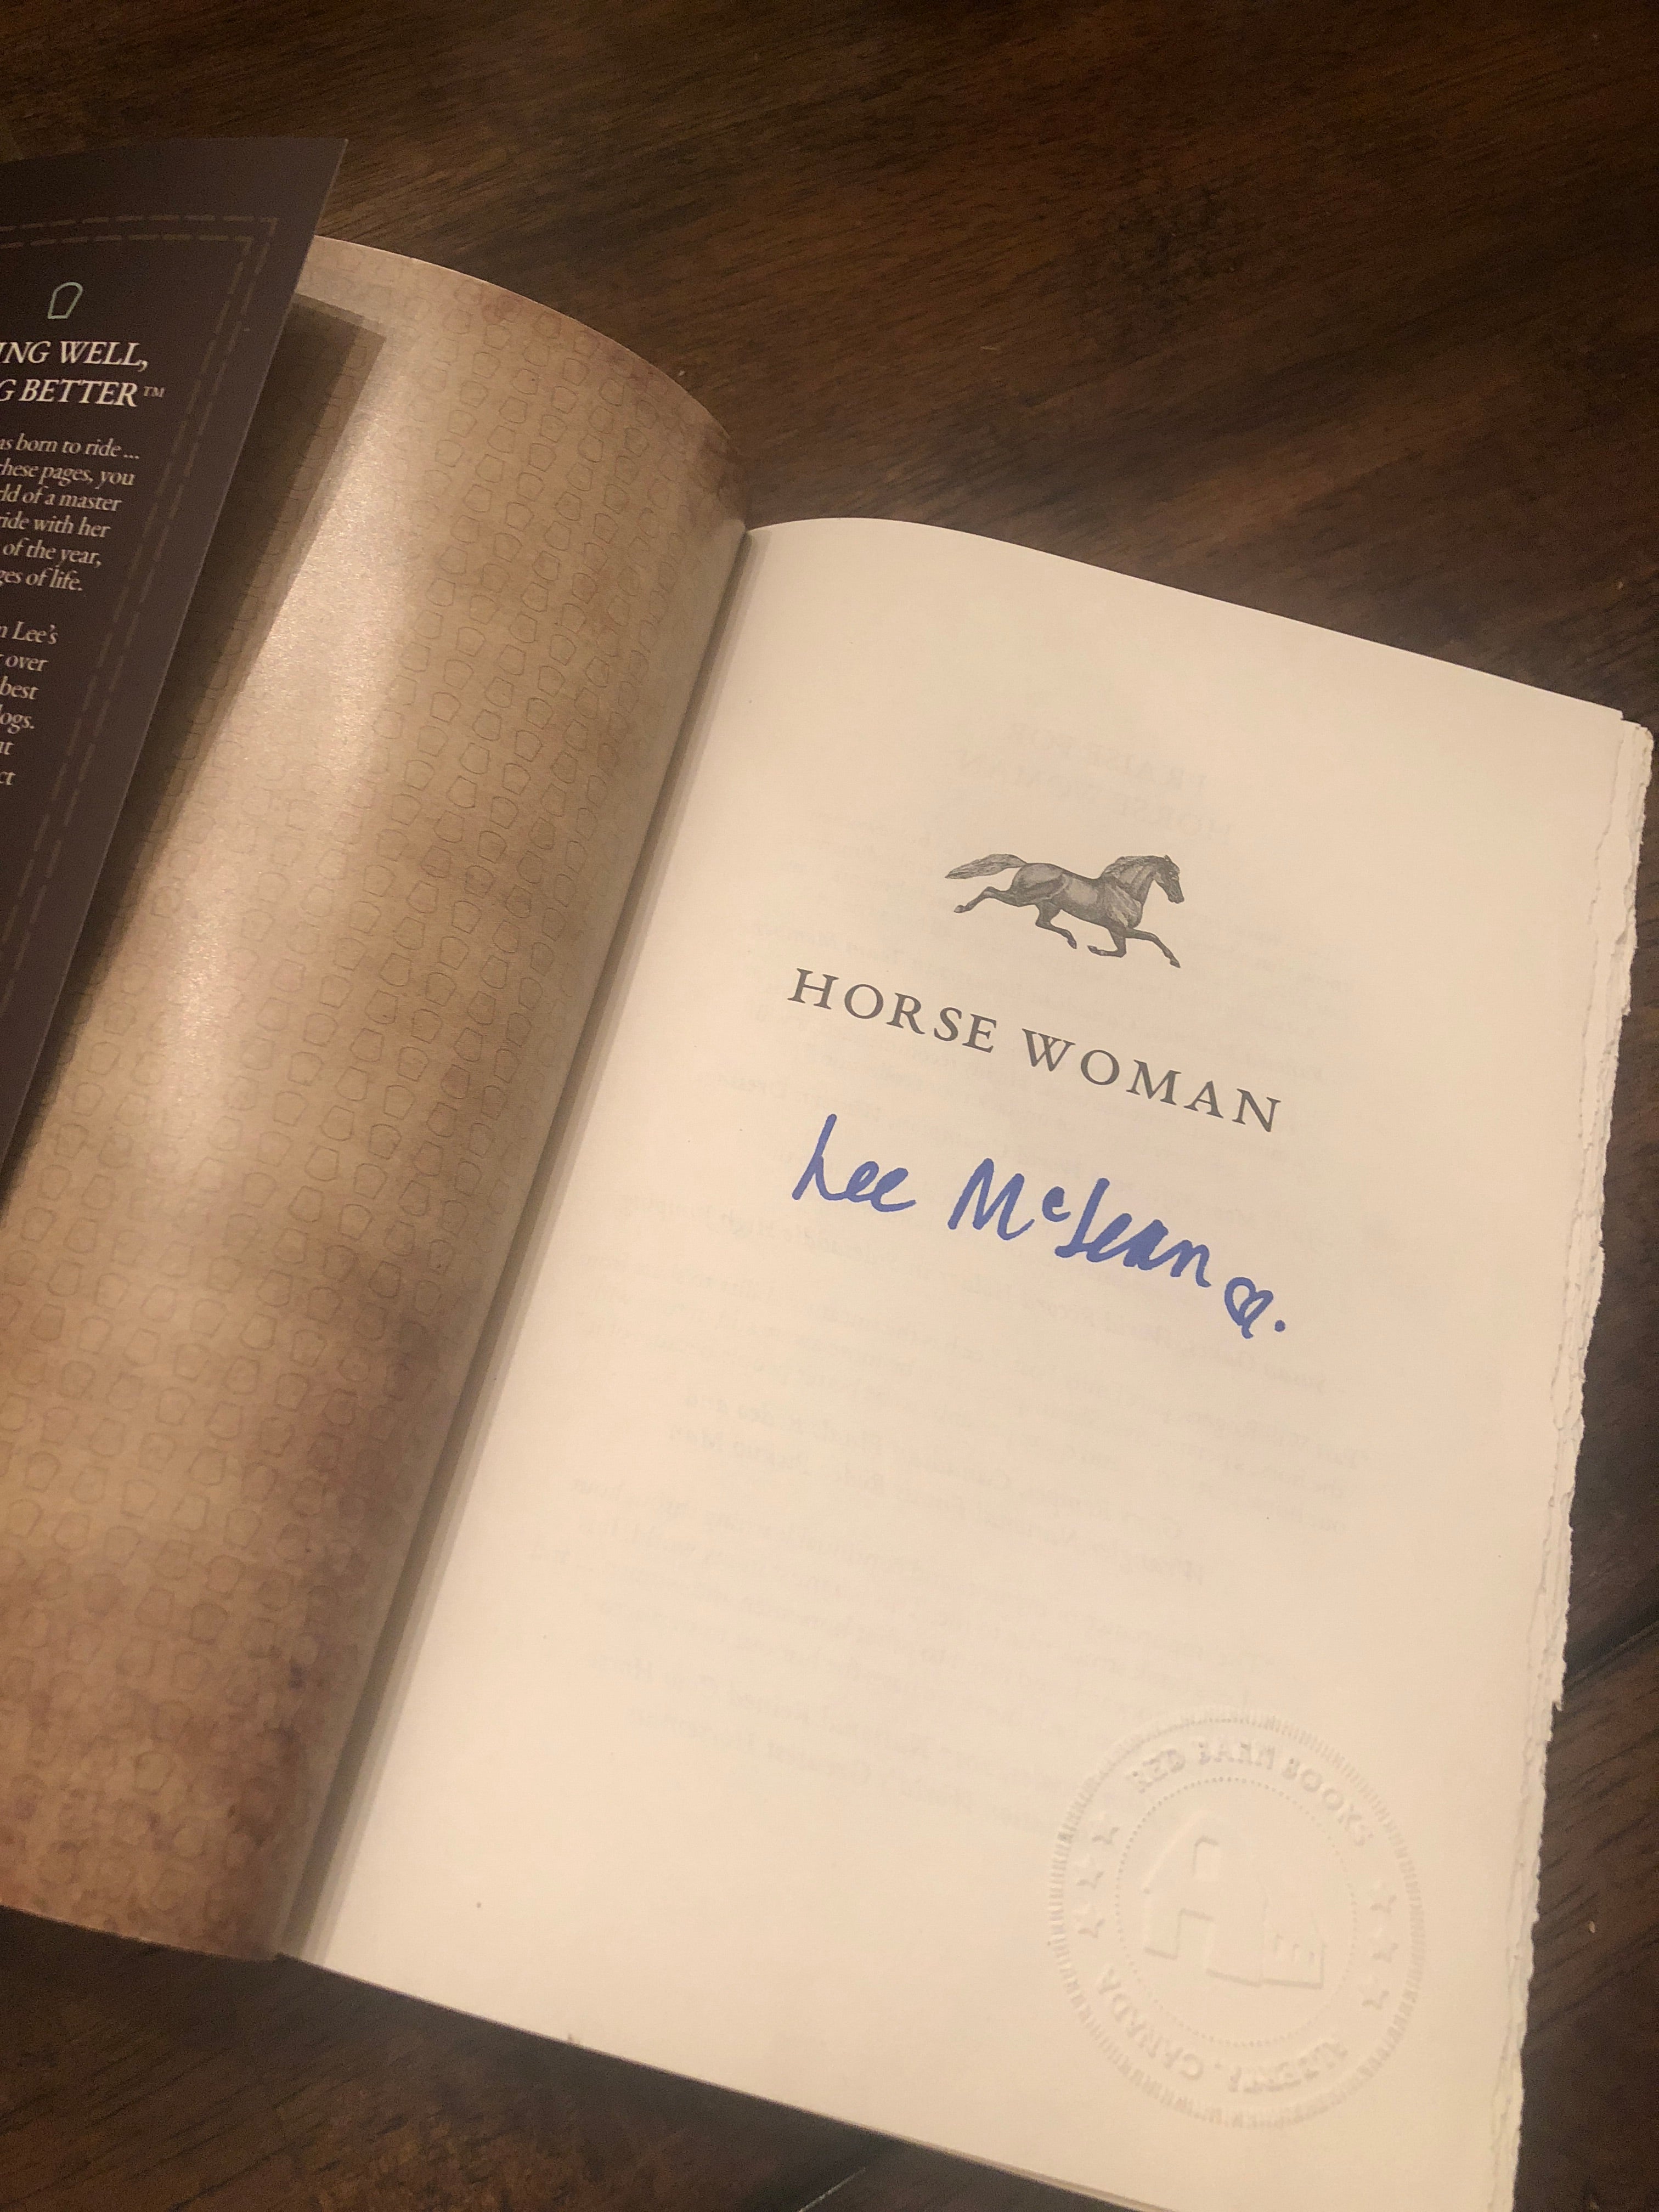 ‘Horse Woman’ by Lee McLean: Signed Deluxe Edition